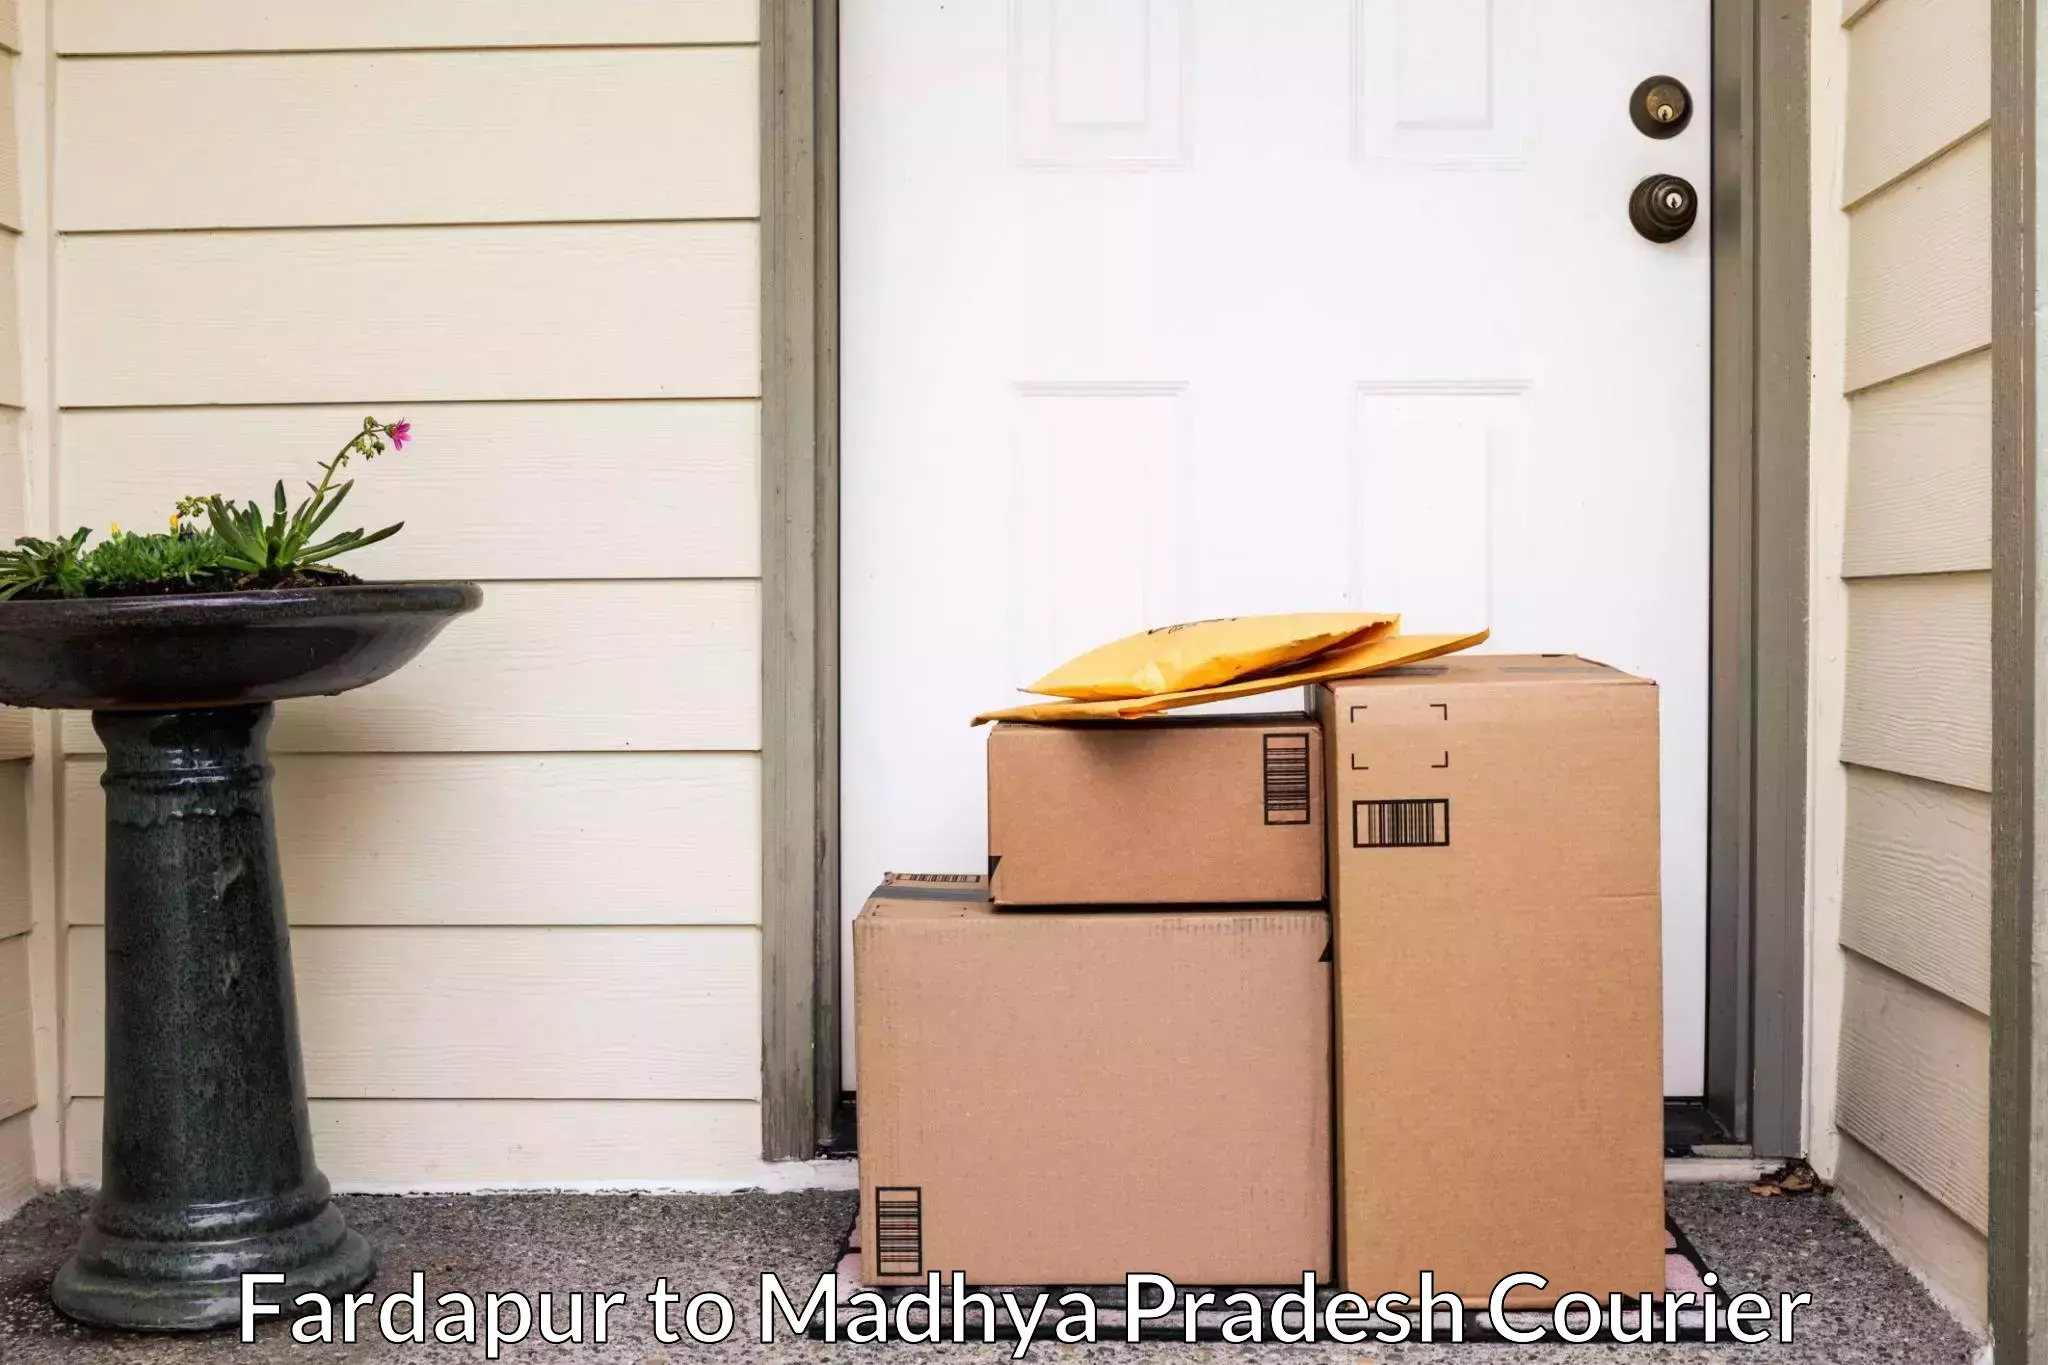 Residential moving experts Fardapur to Datia